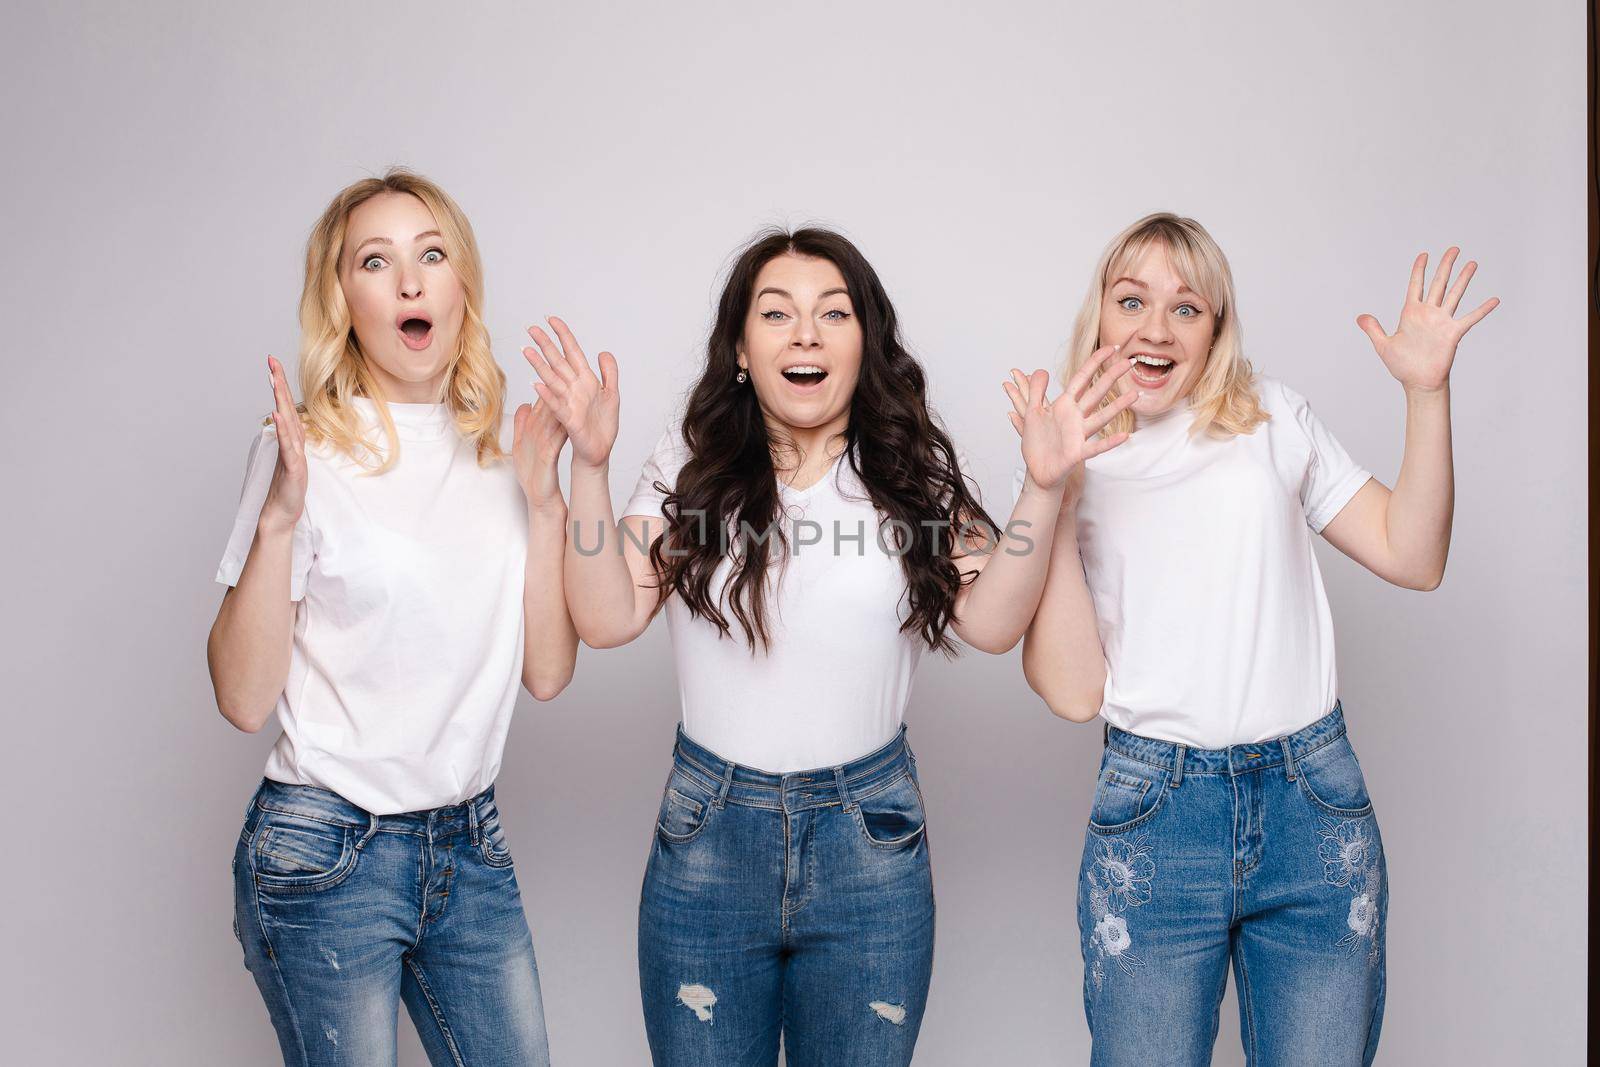 Three female friends looking at camera and shouting in surprise on white isolated background in studio. Amazed girl in white shirts and jeans with big eyes and open mouth posing. Concept of emotions.